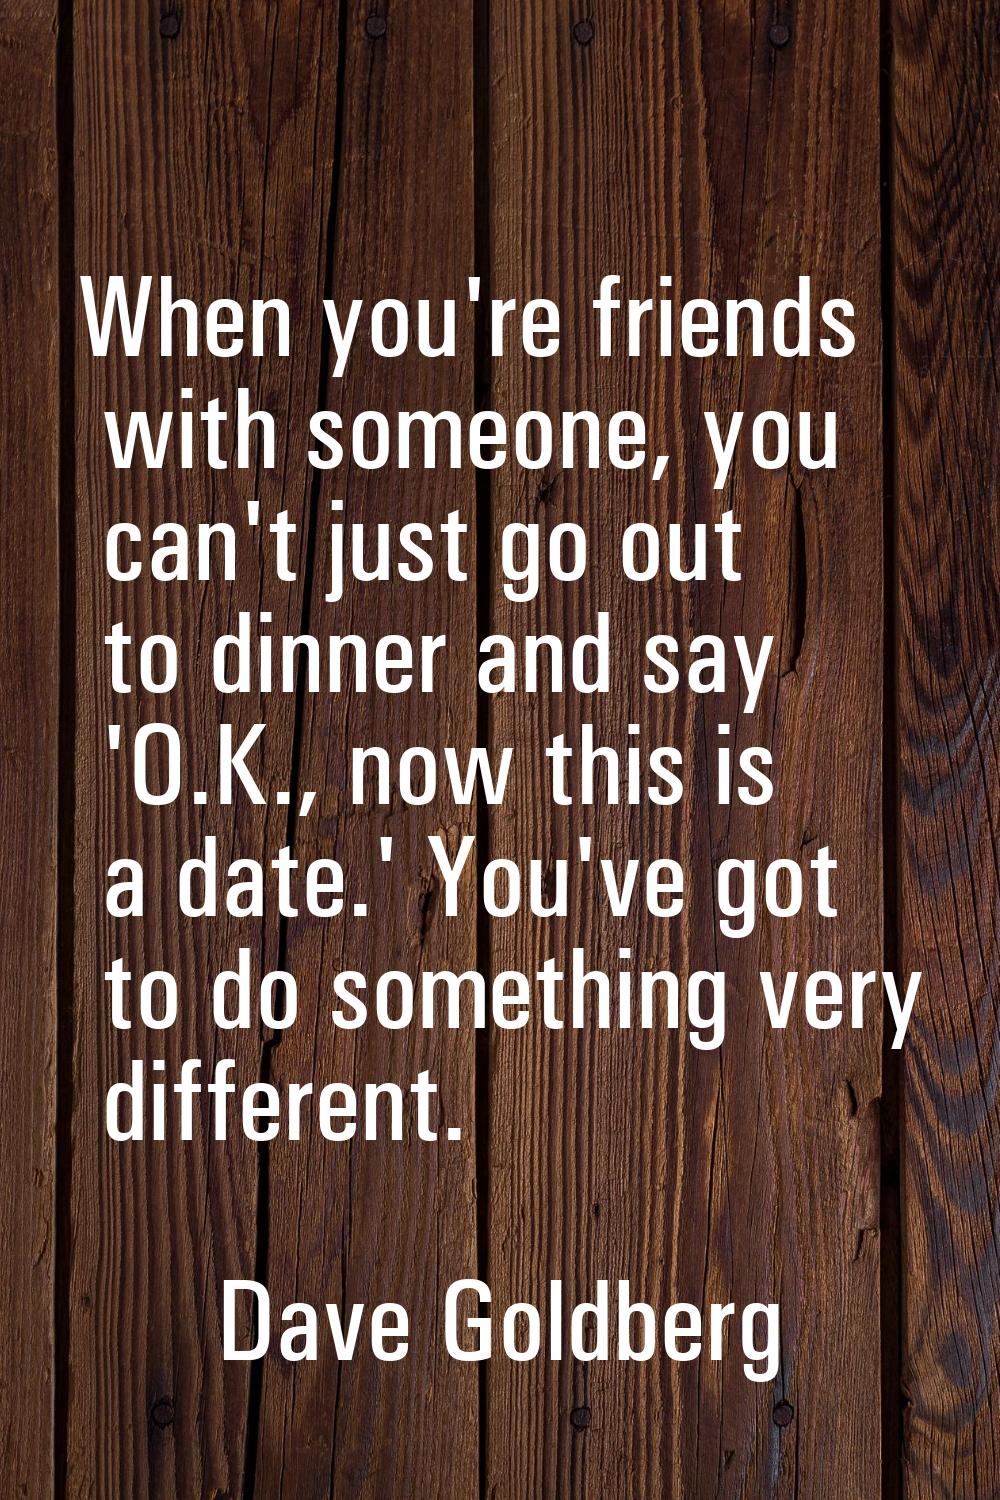 When you're friends with someone, you can't just go out to dinner and say 'O.K., now this is a date